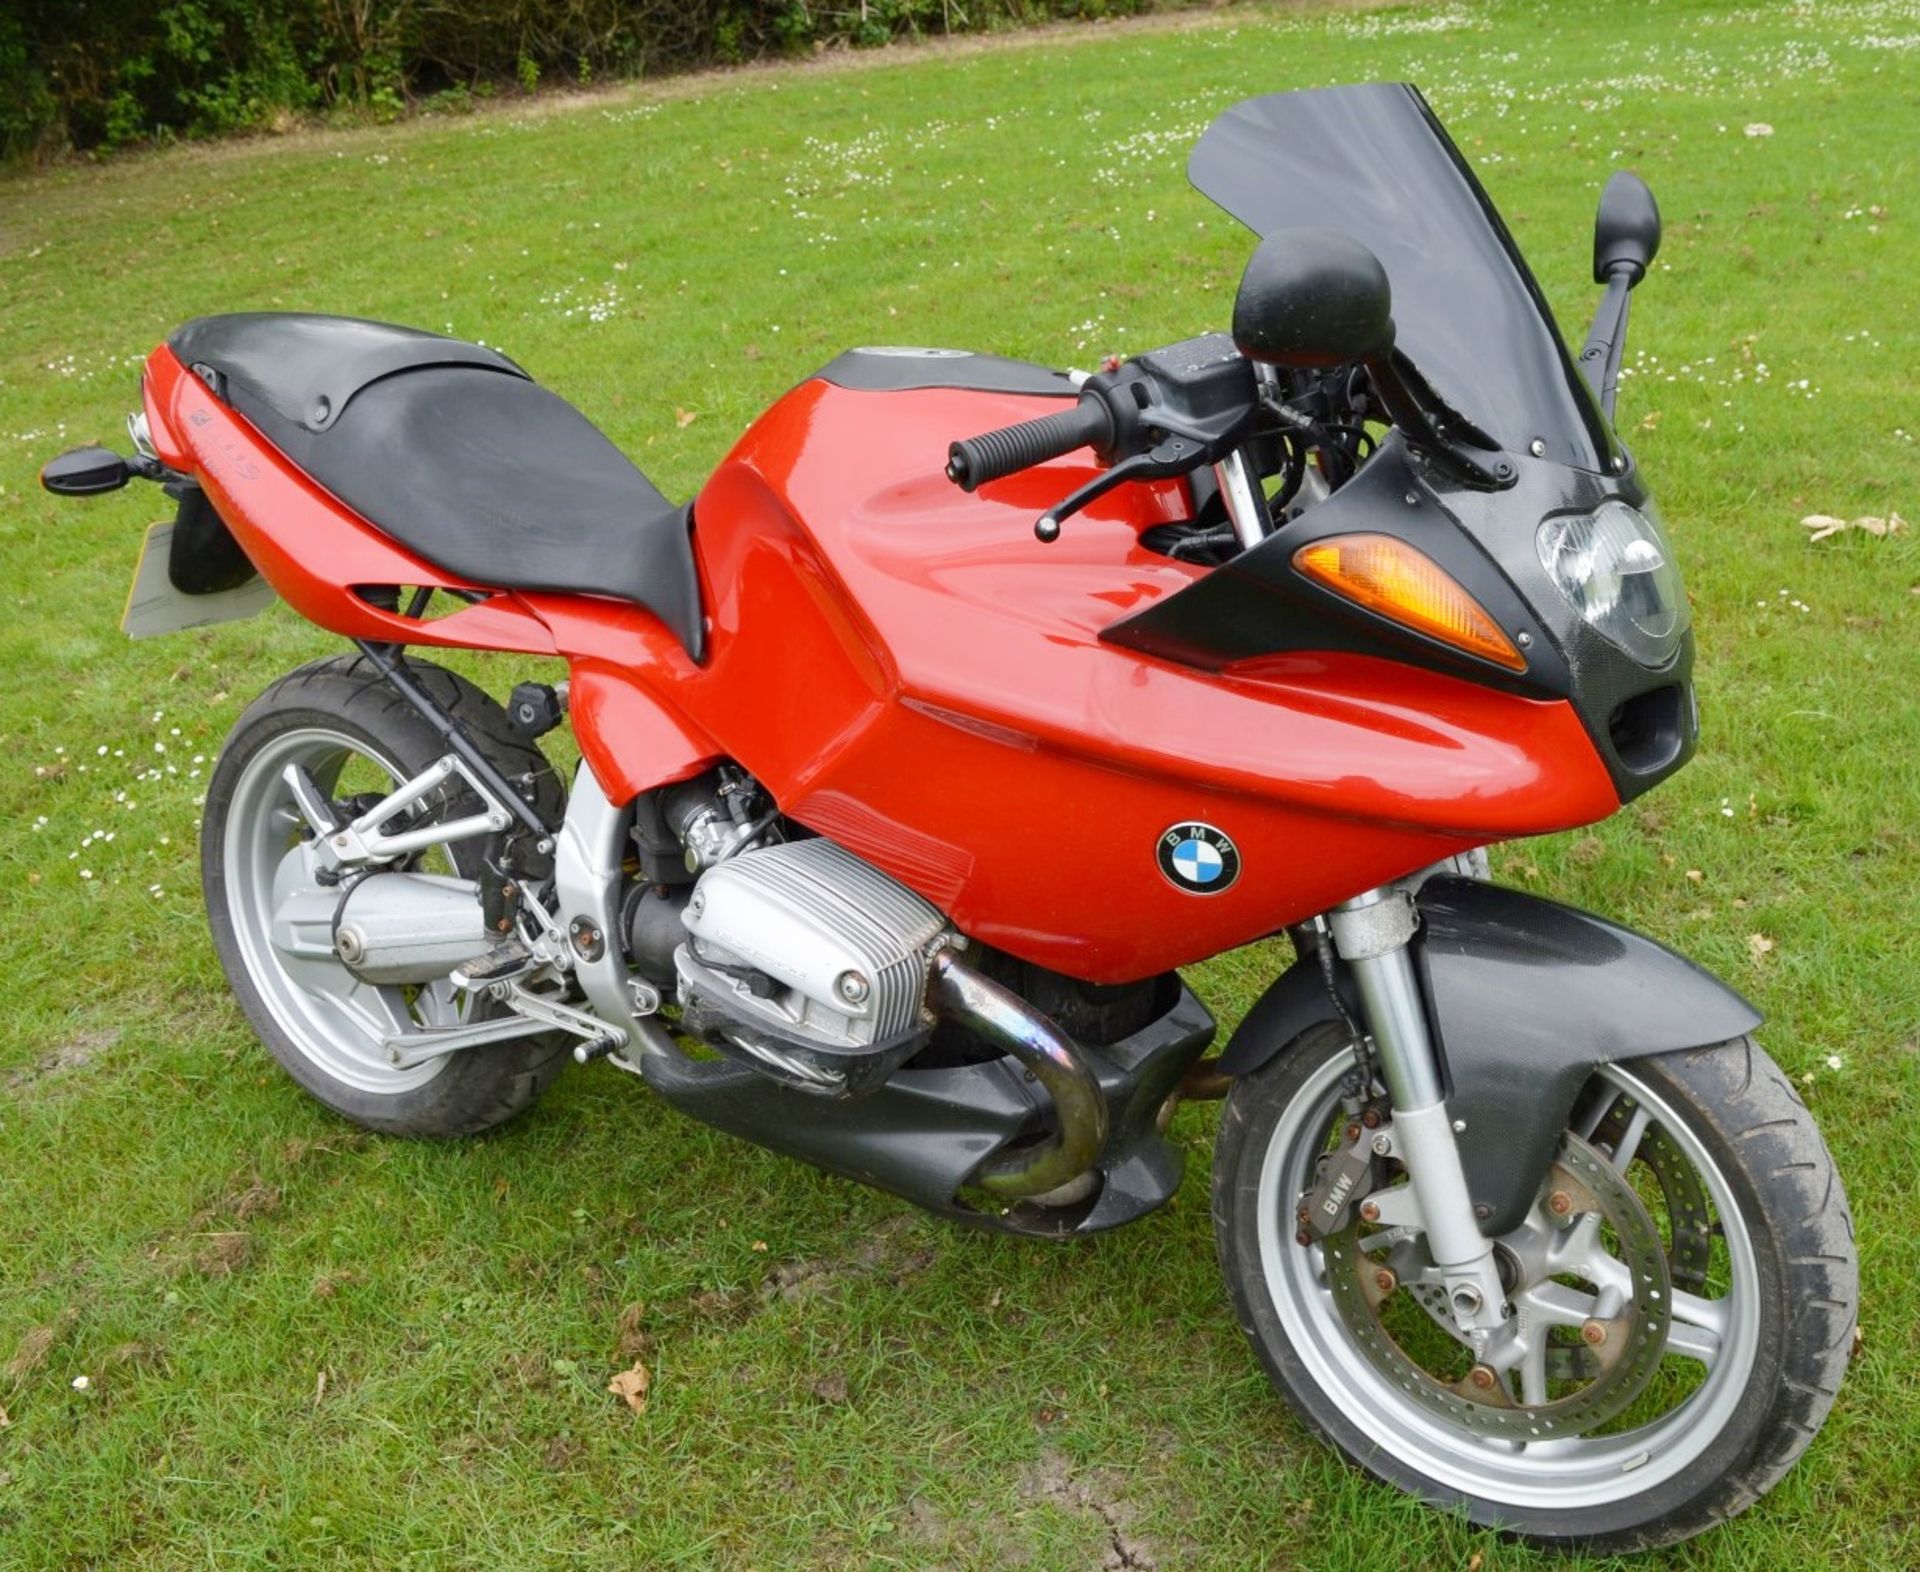 1 x BMW R1100S Motorcycle Bike - Year 2001 - 4,487 Miles - MOT Expires May 2018 - Image 29 of 35